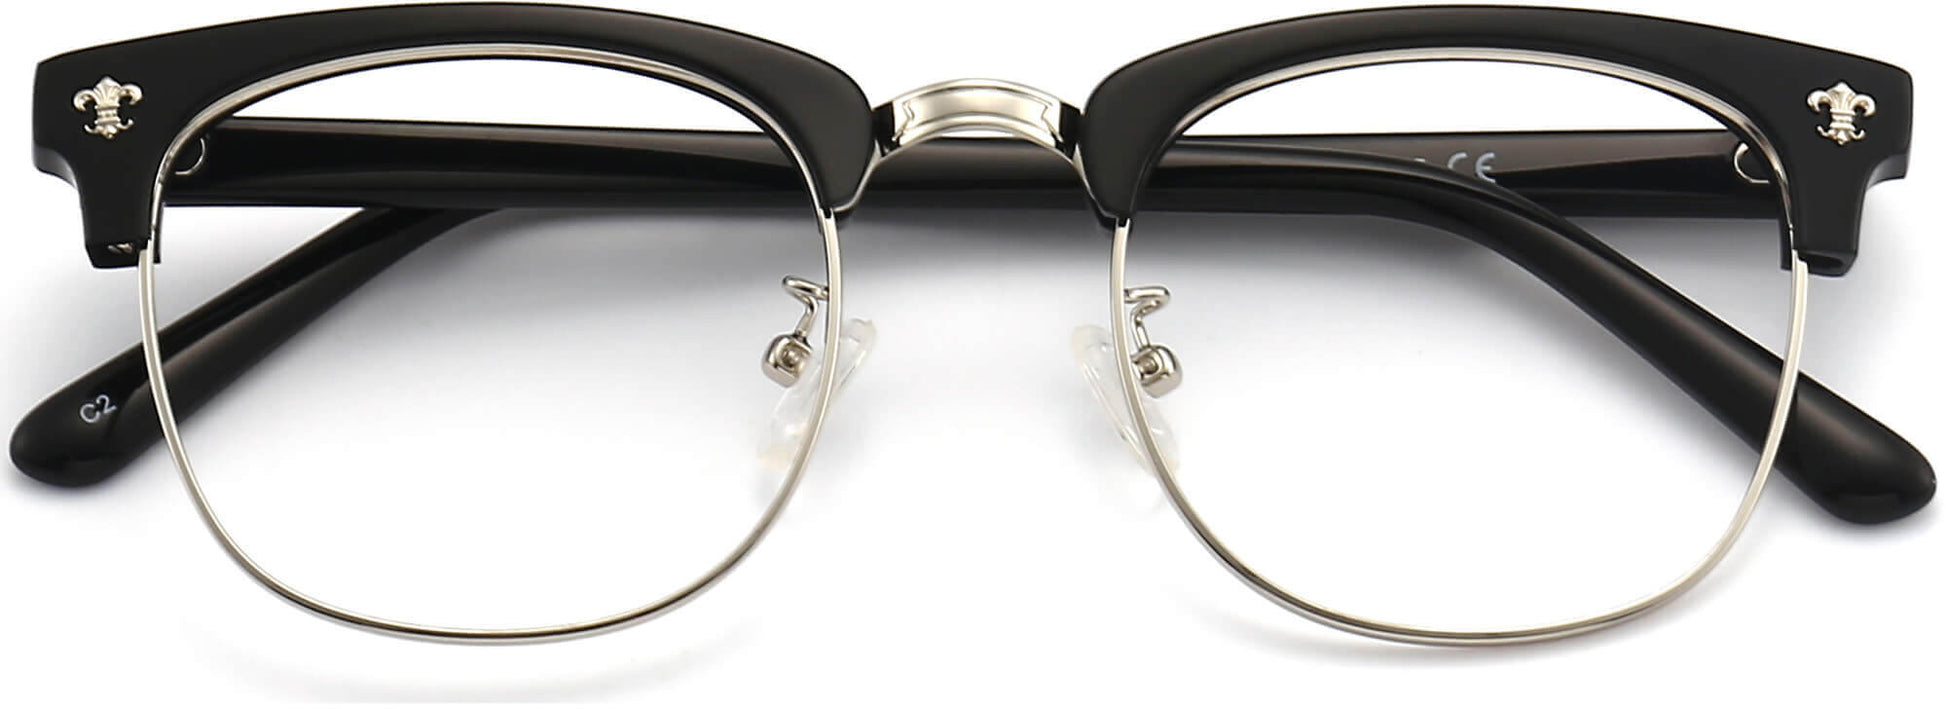 Colin Browline Black Eyeglasses from ANRRI, closed view